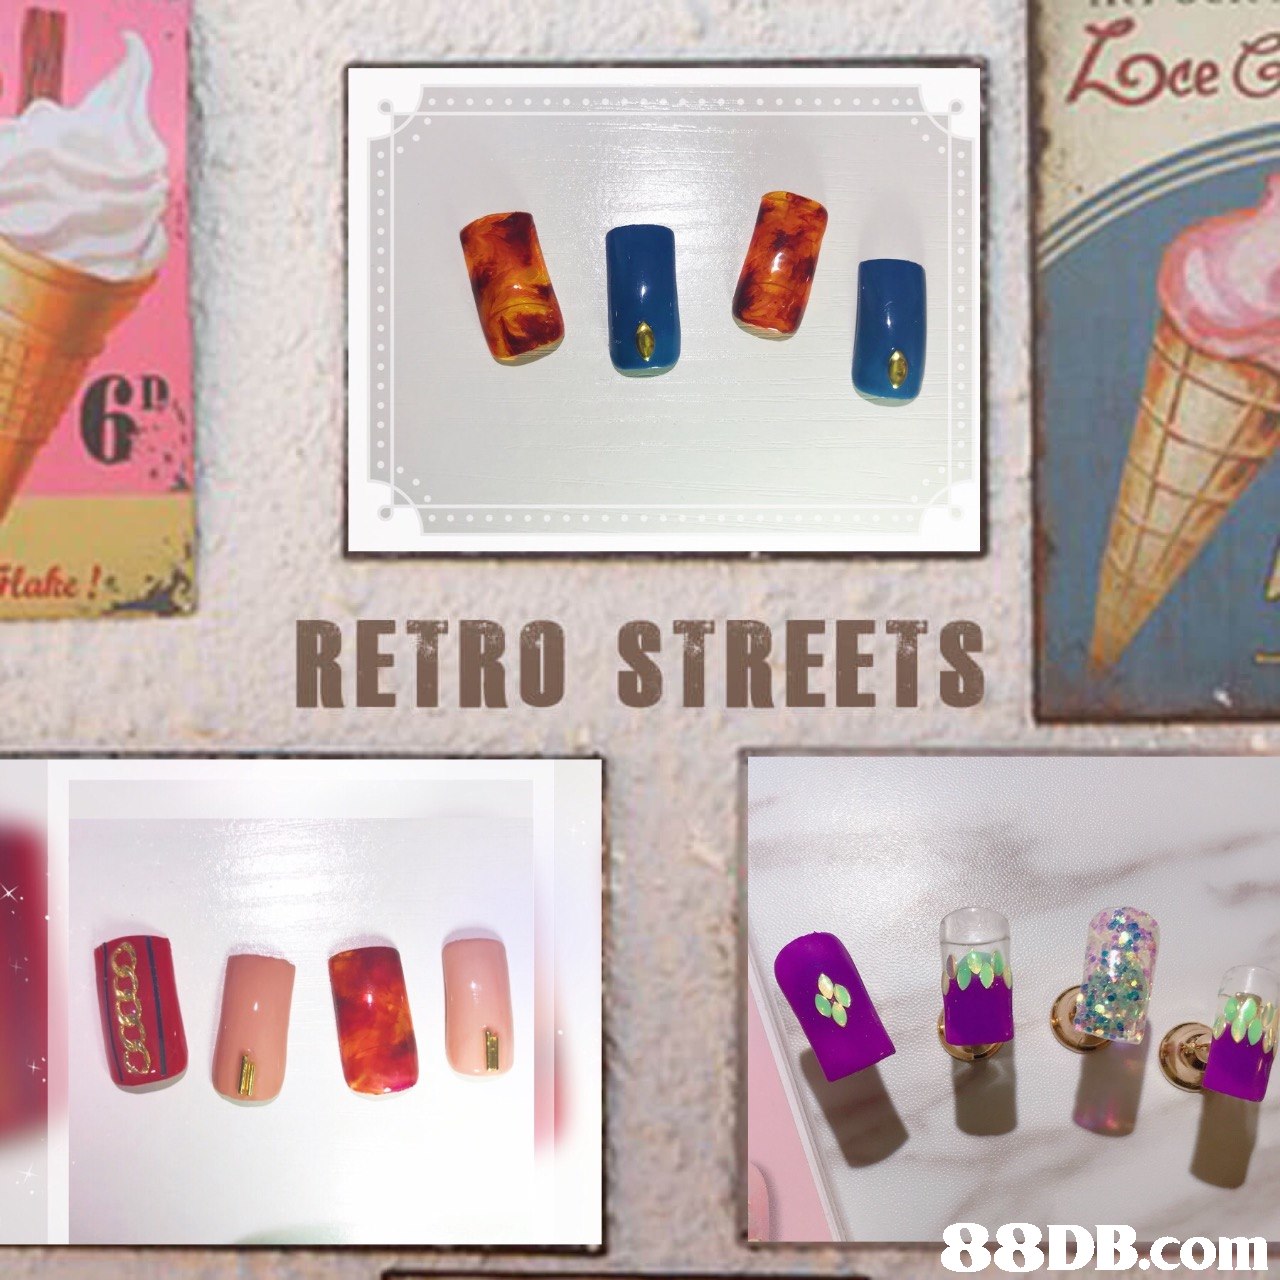 i" RETRO STREETS   Product,Glass bottle,Material property,Cosmetics,Finger